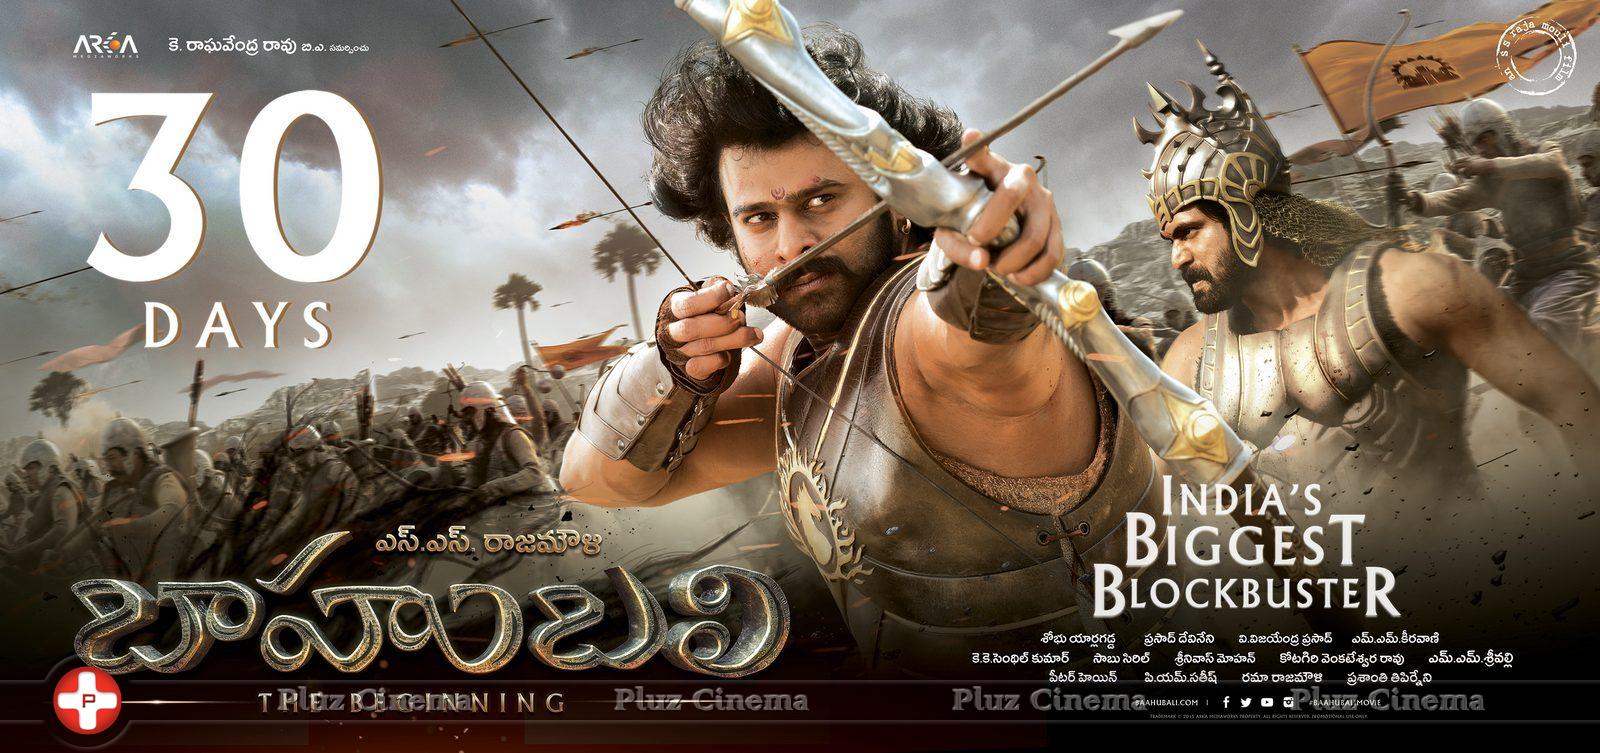 Baahubali Movie Posters | Picture 1091898